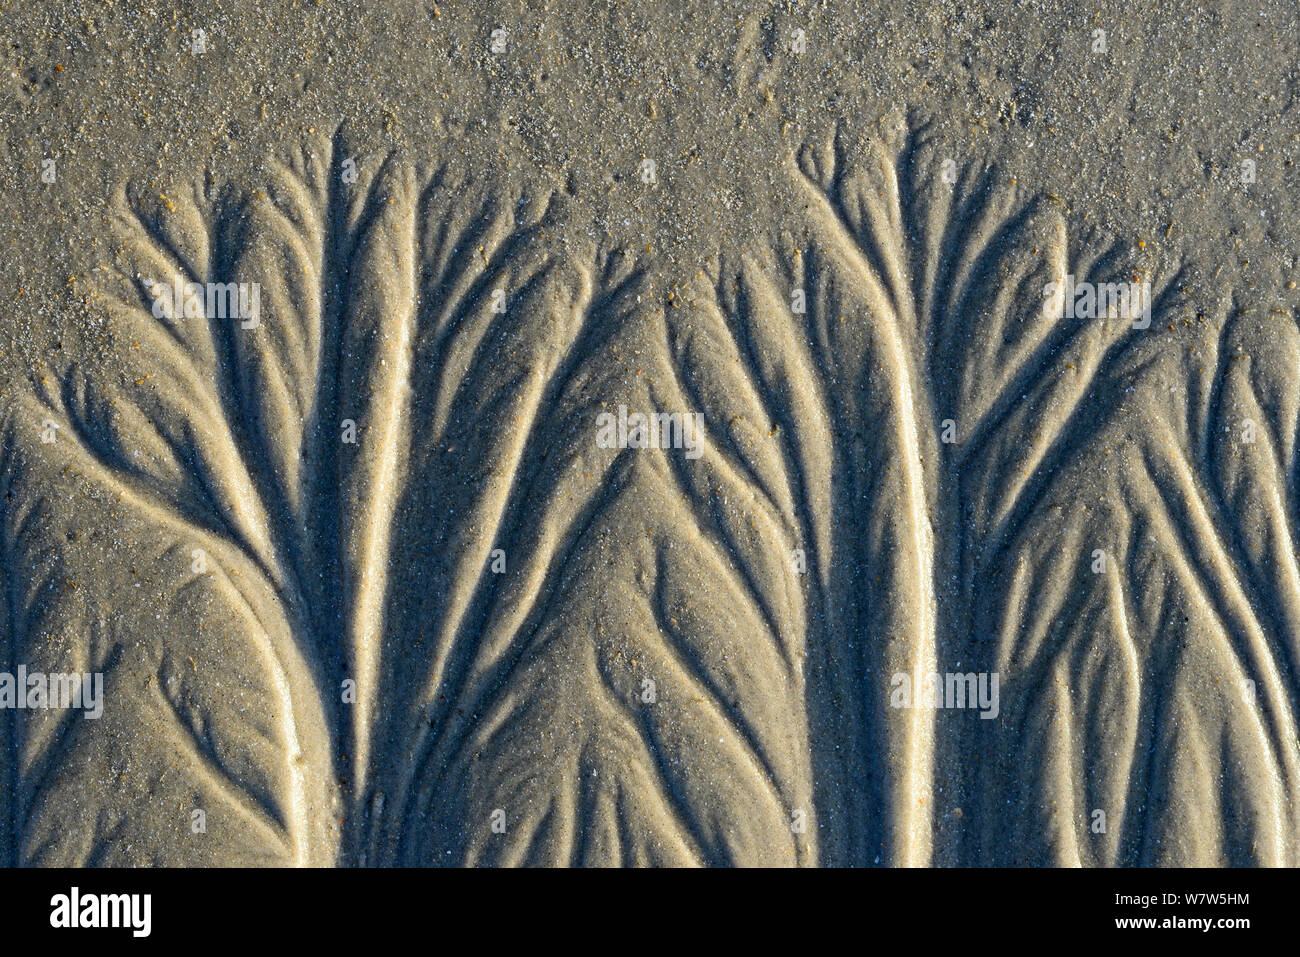 Patterns in sand on beach, Guinea Bissau. Stock Photo